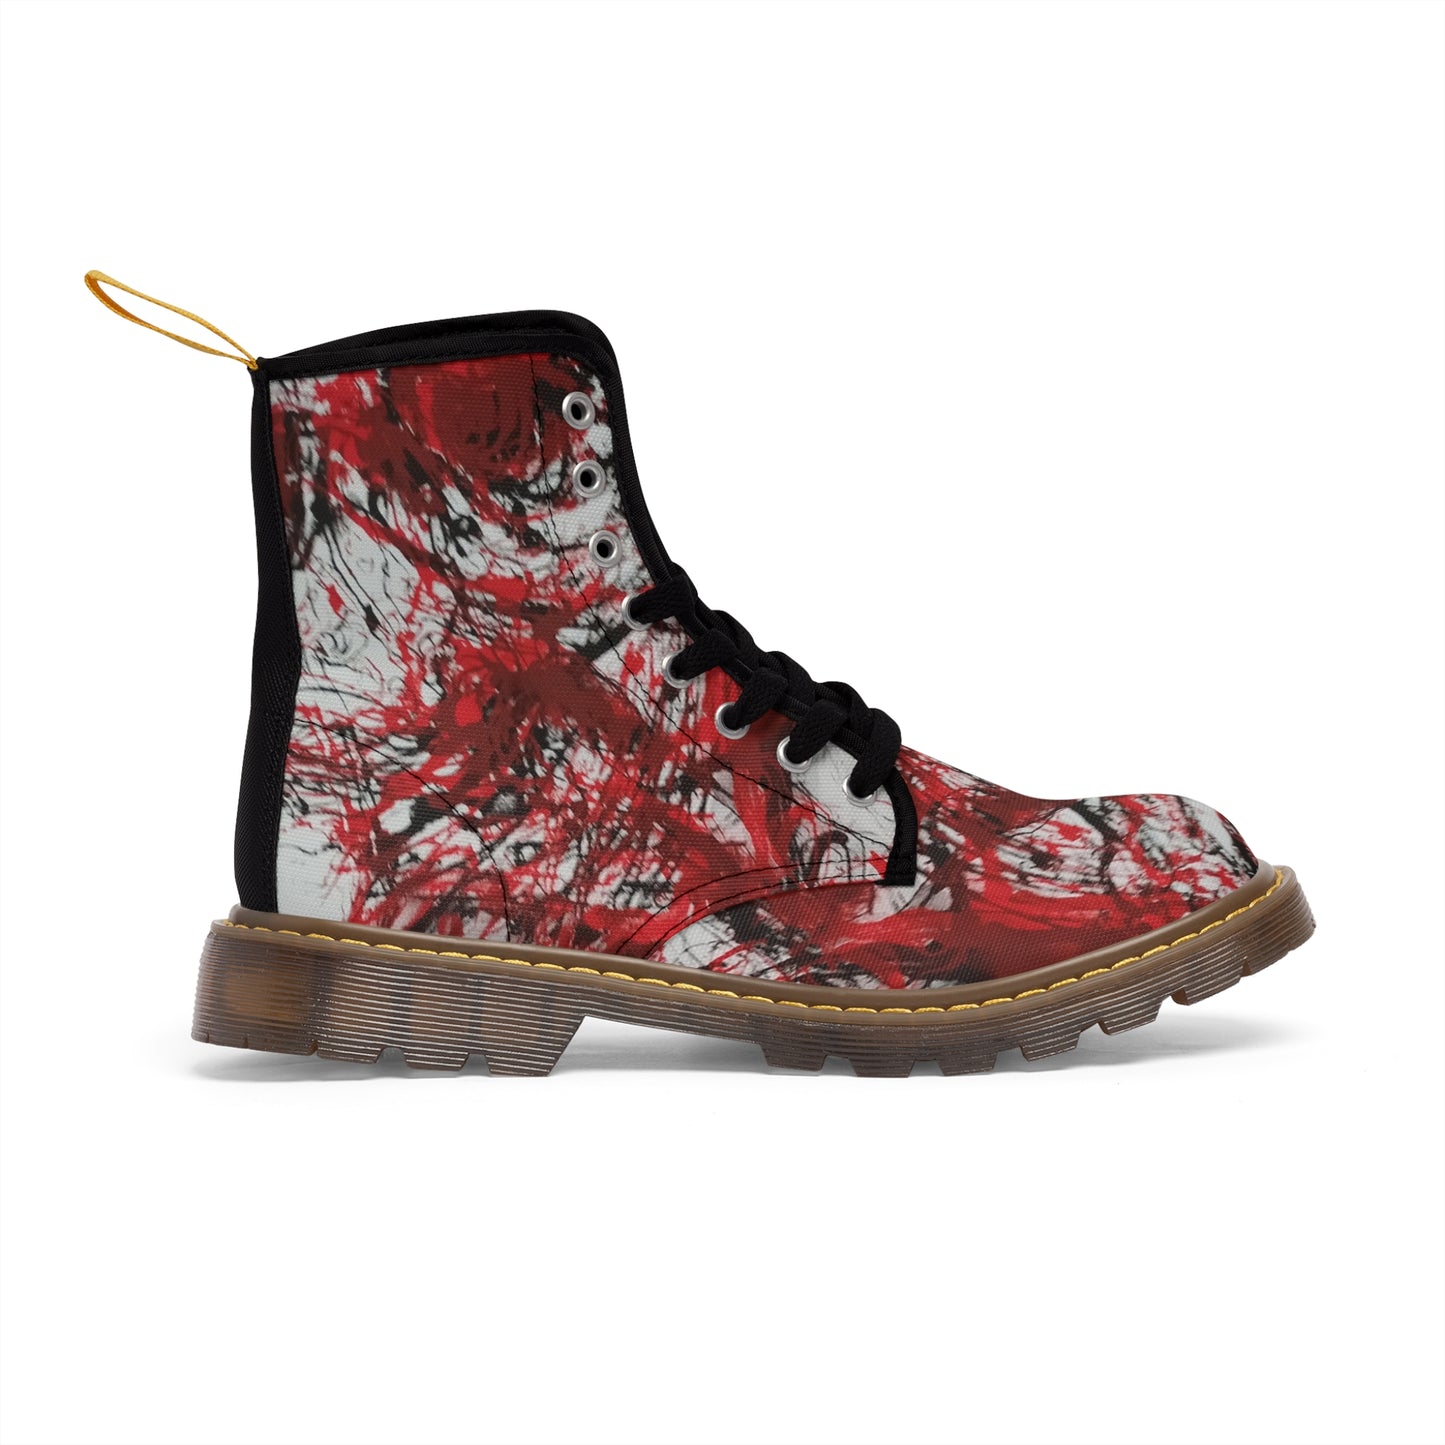 "The Scream" Men's Canvas Boots - Red